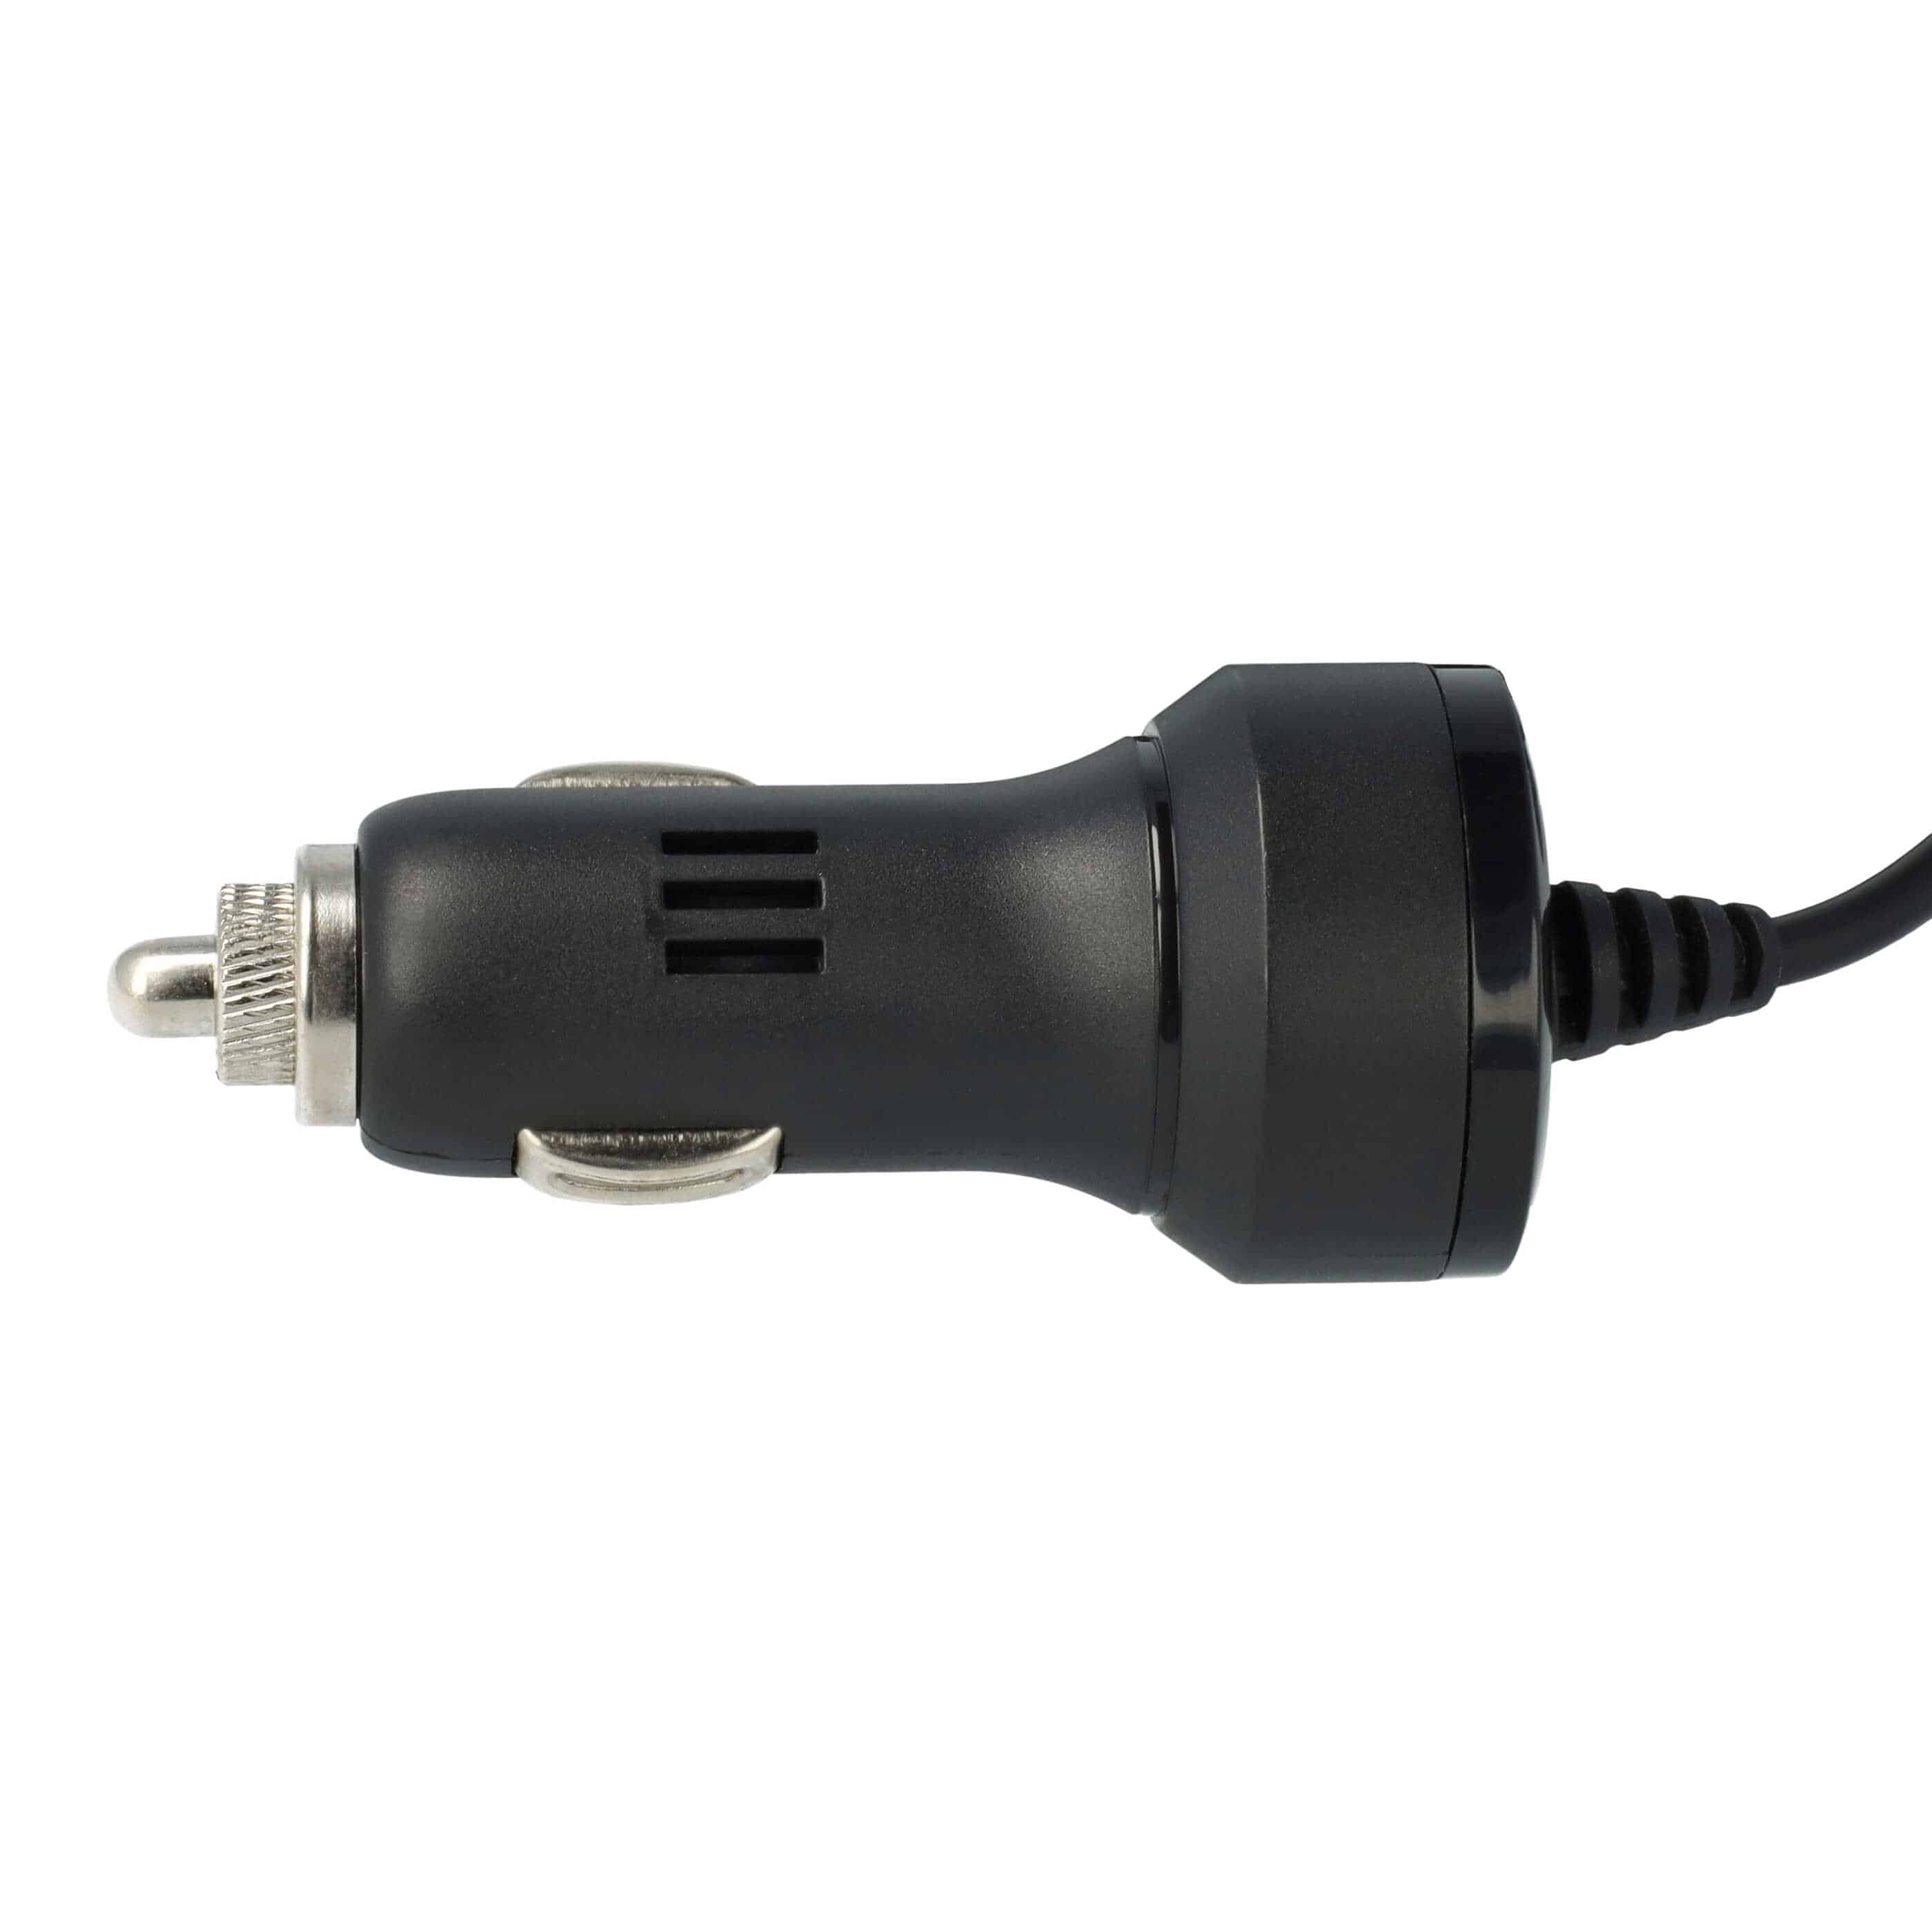 USB C Car Charger Cable 2.4 A suitable for Book HuaweiDevices like Smartphone, GPS, Sat Navs